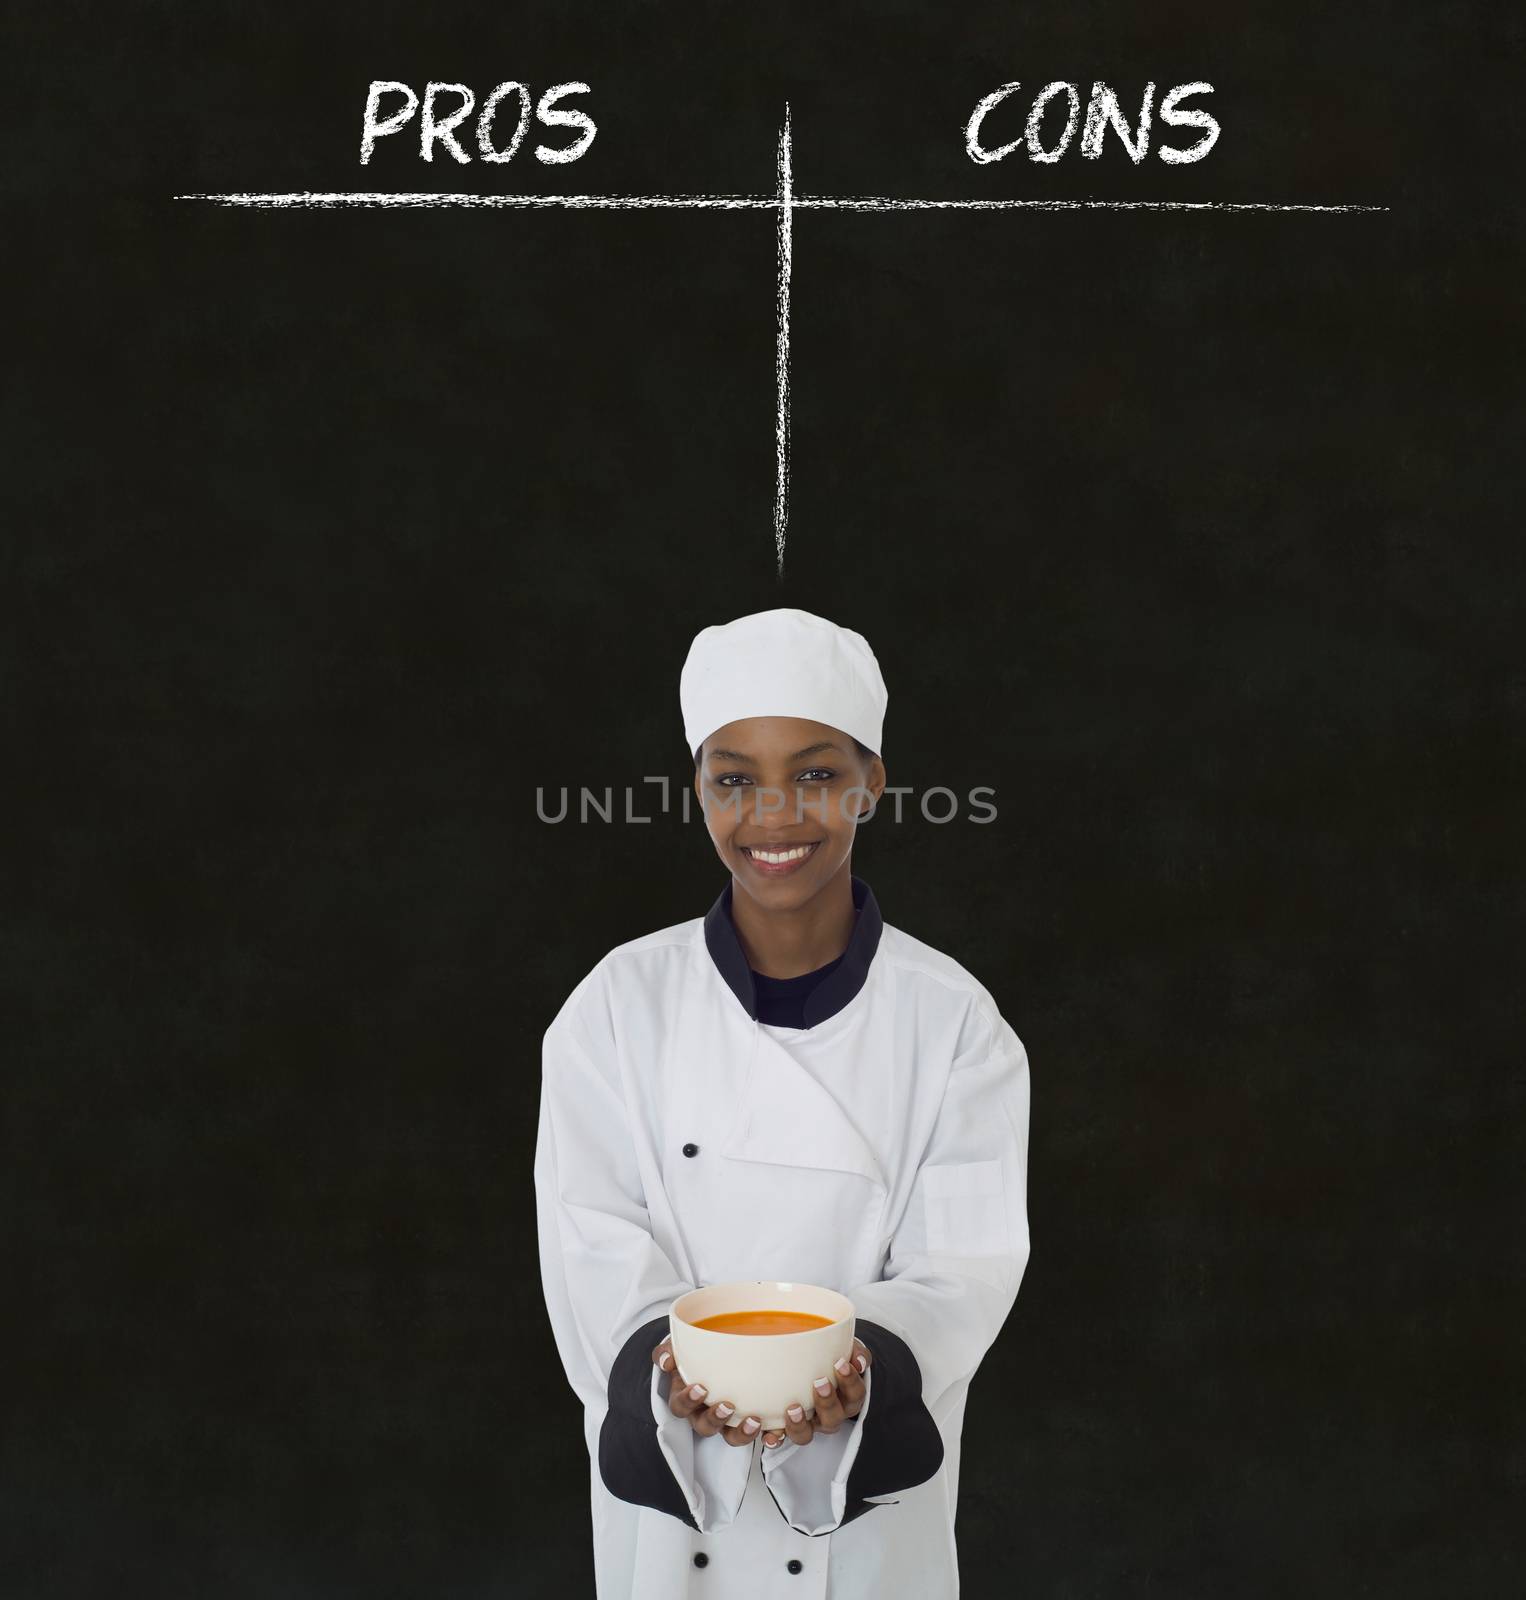 African American woman chef holding soup bowl with chalk pros and cons on blackboard background